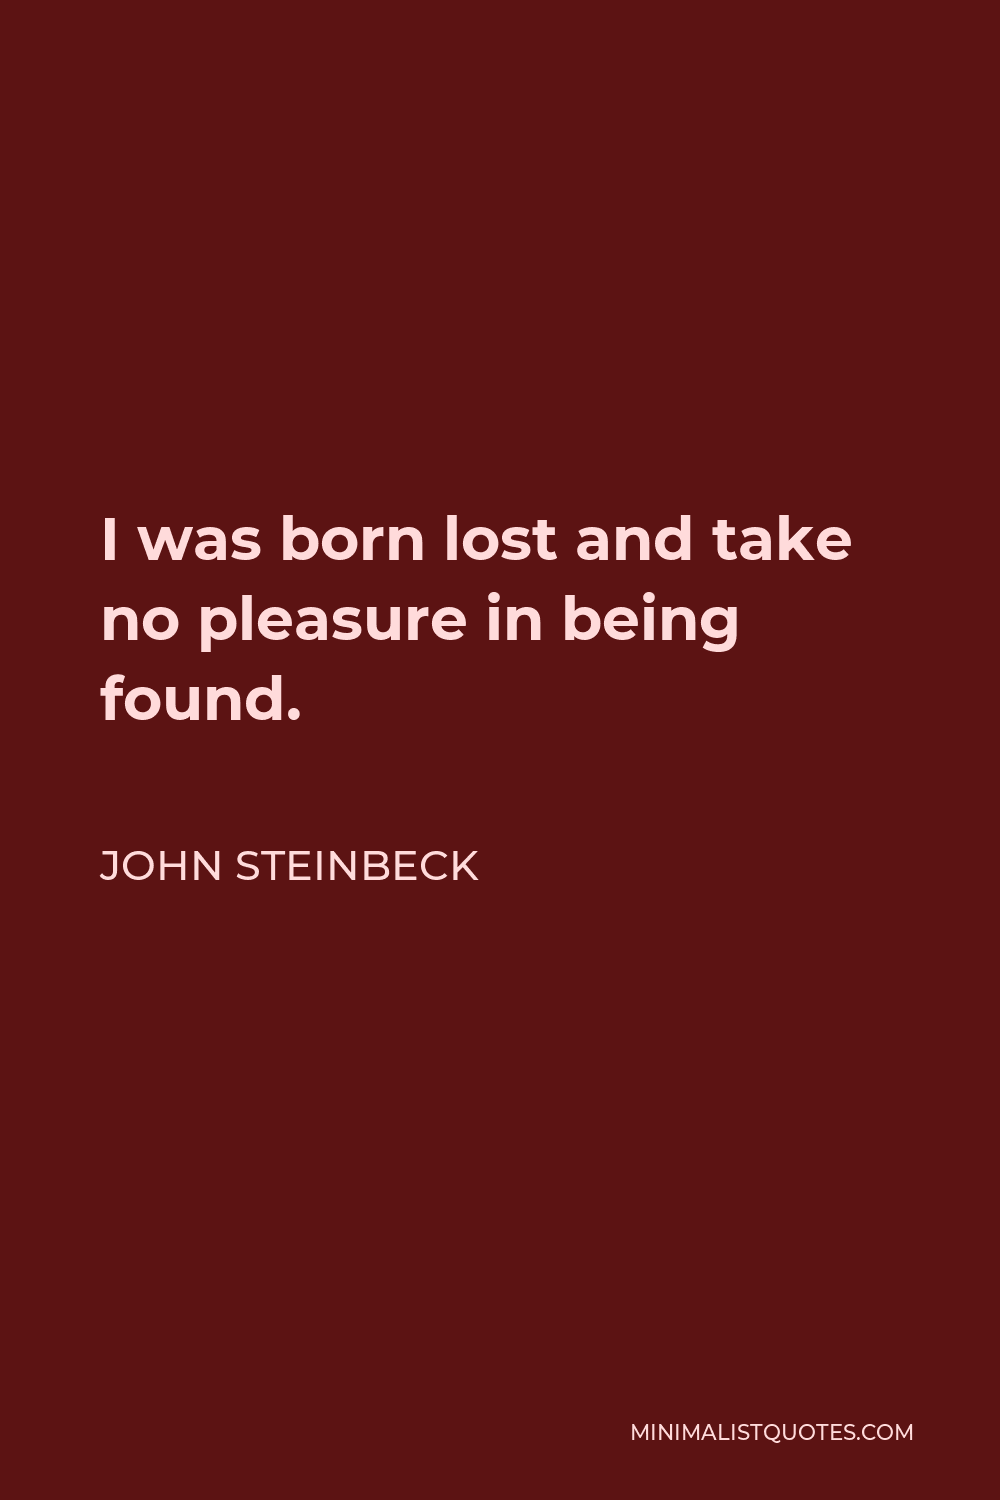 John Steinbeck Quote - I was born lost and take no pleasure in being found.